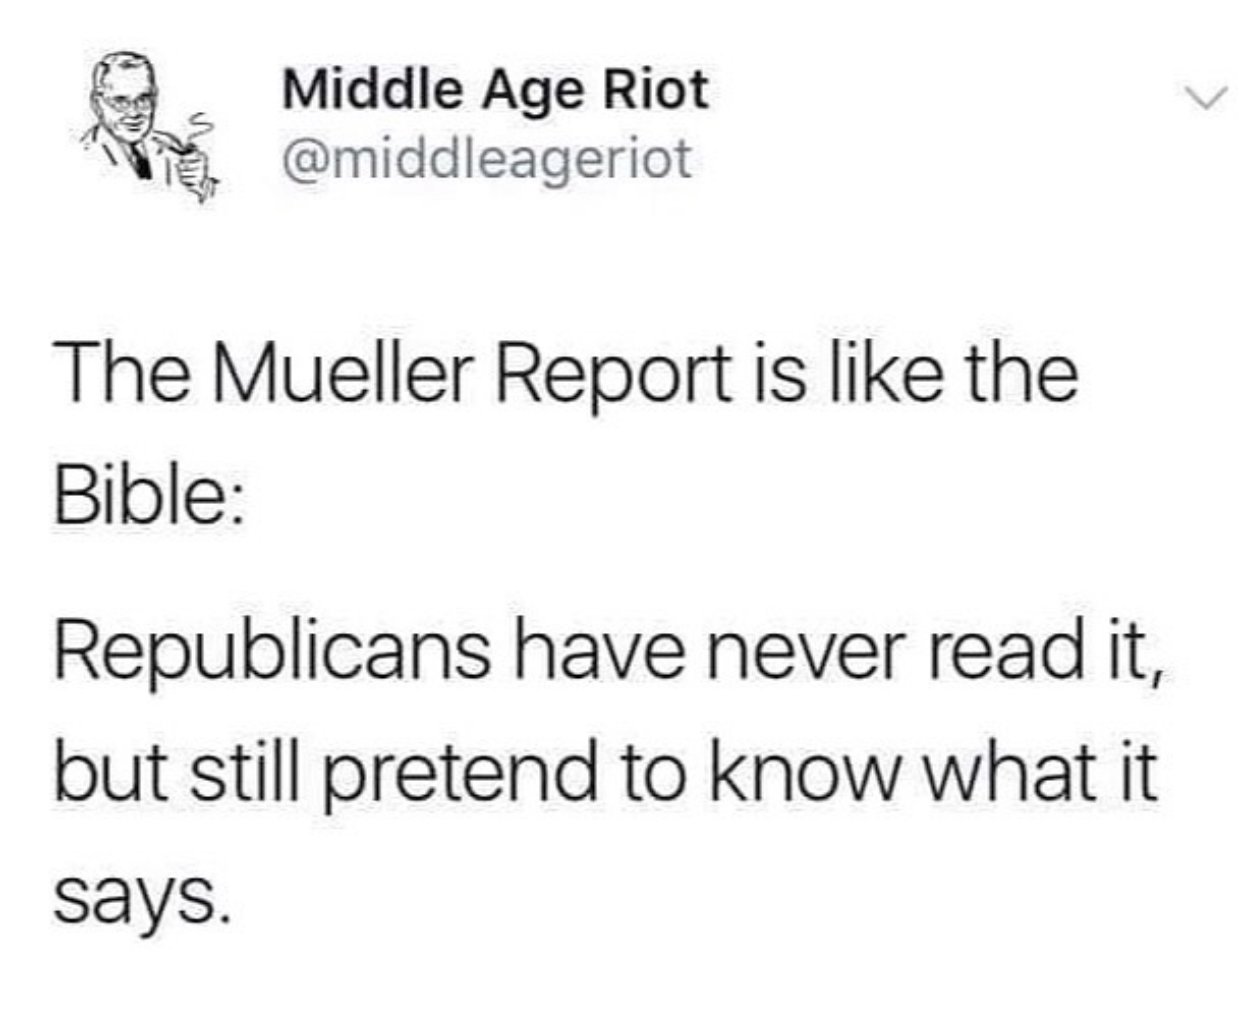 love myself - We Middle Age Riot The Mueller Report is the Bible Republicans have never read it, but still pretend to know what it says.